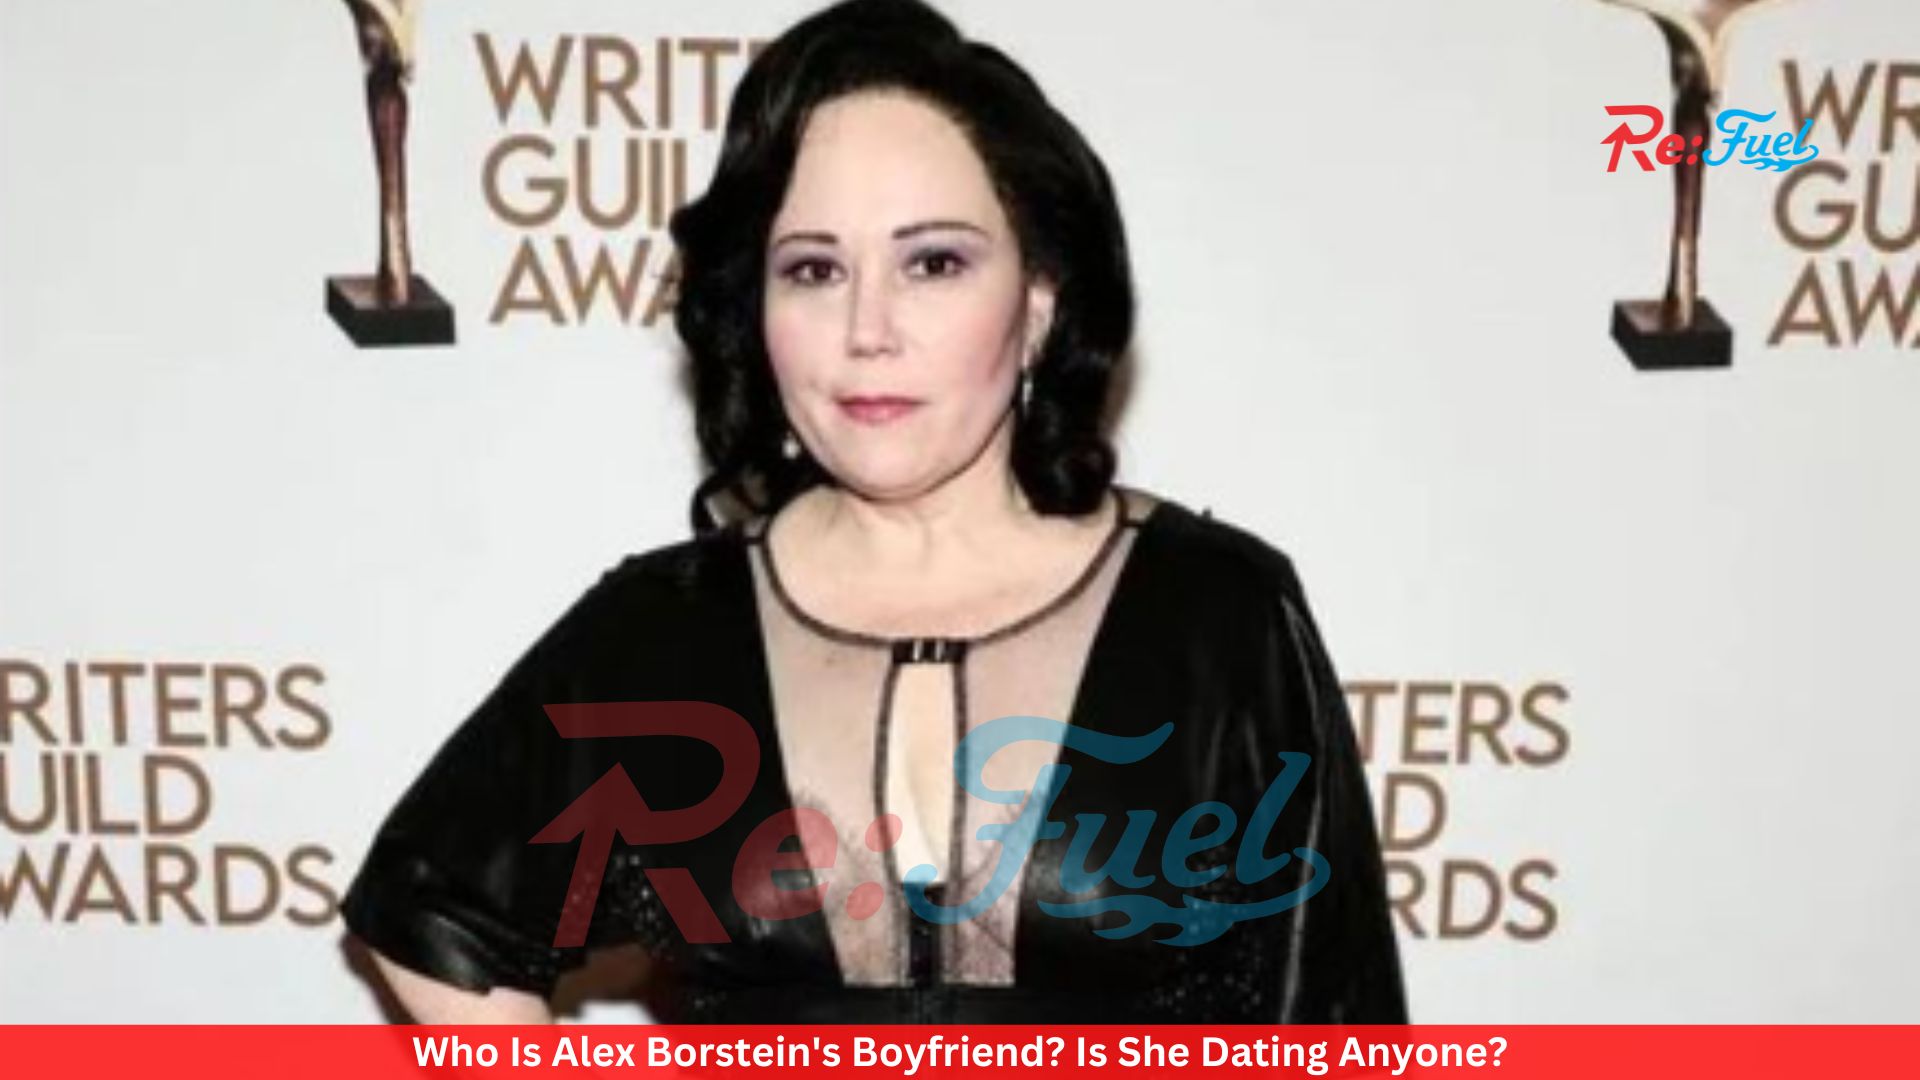 Who Is Alex Borstein's Boyfriend? Is She Dating Anyone?